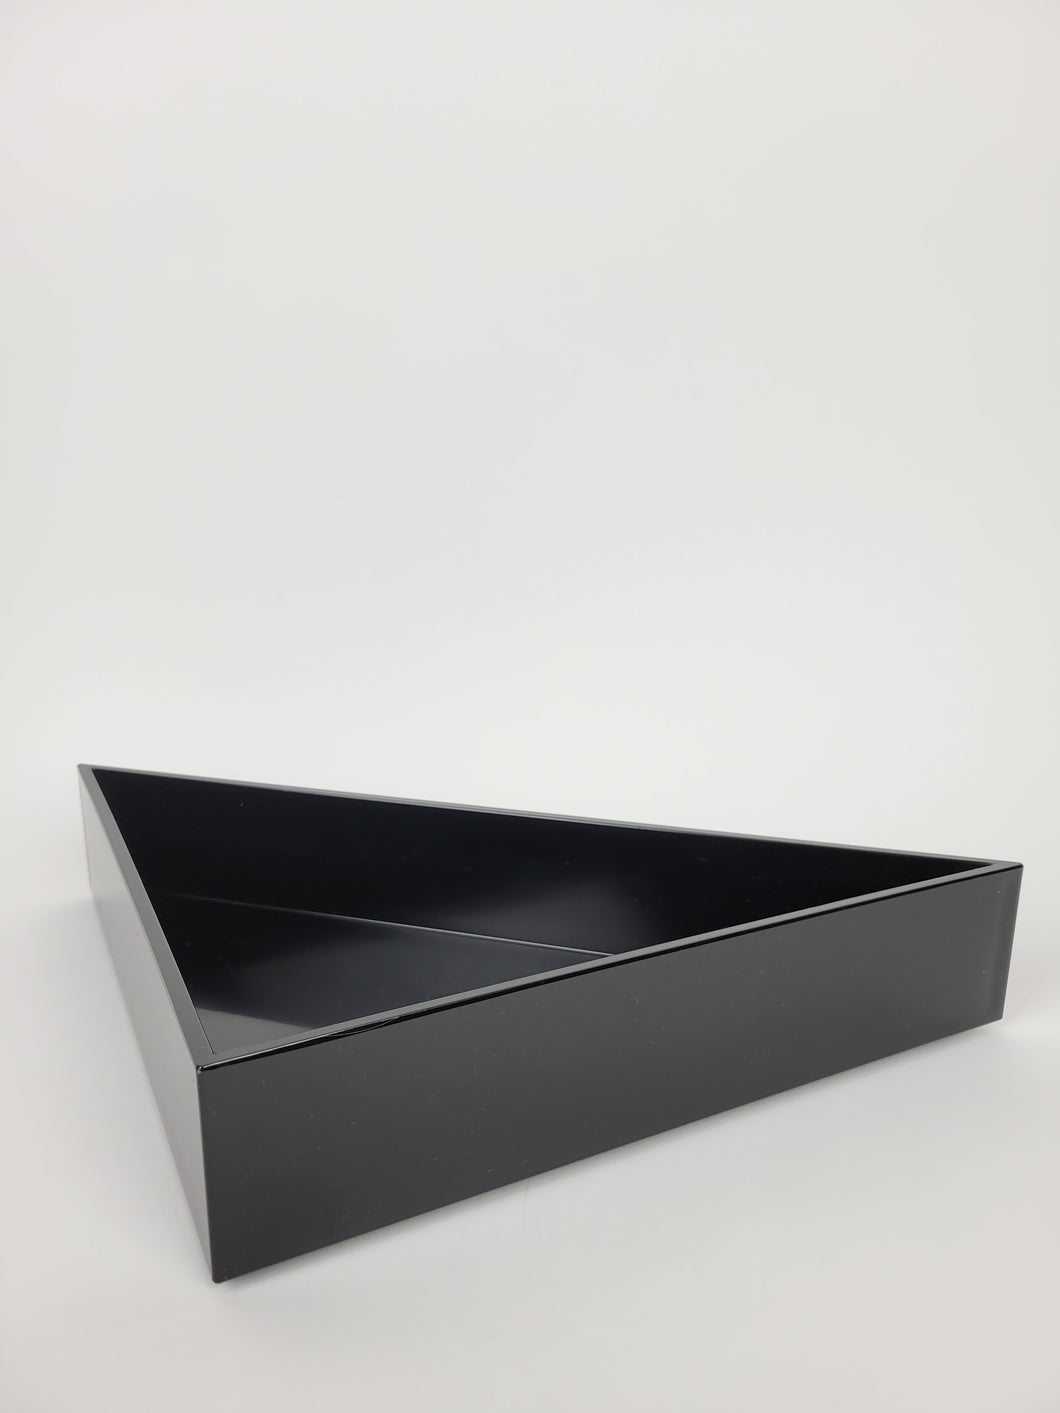 Triangular Tray in Black from Japan